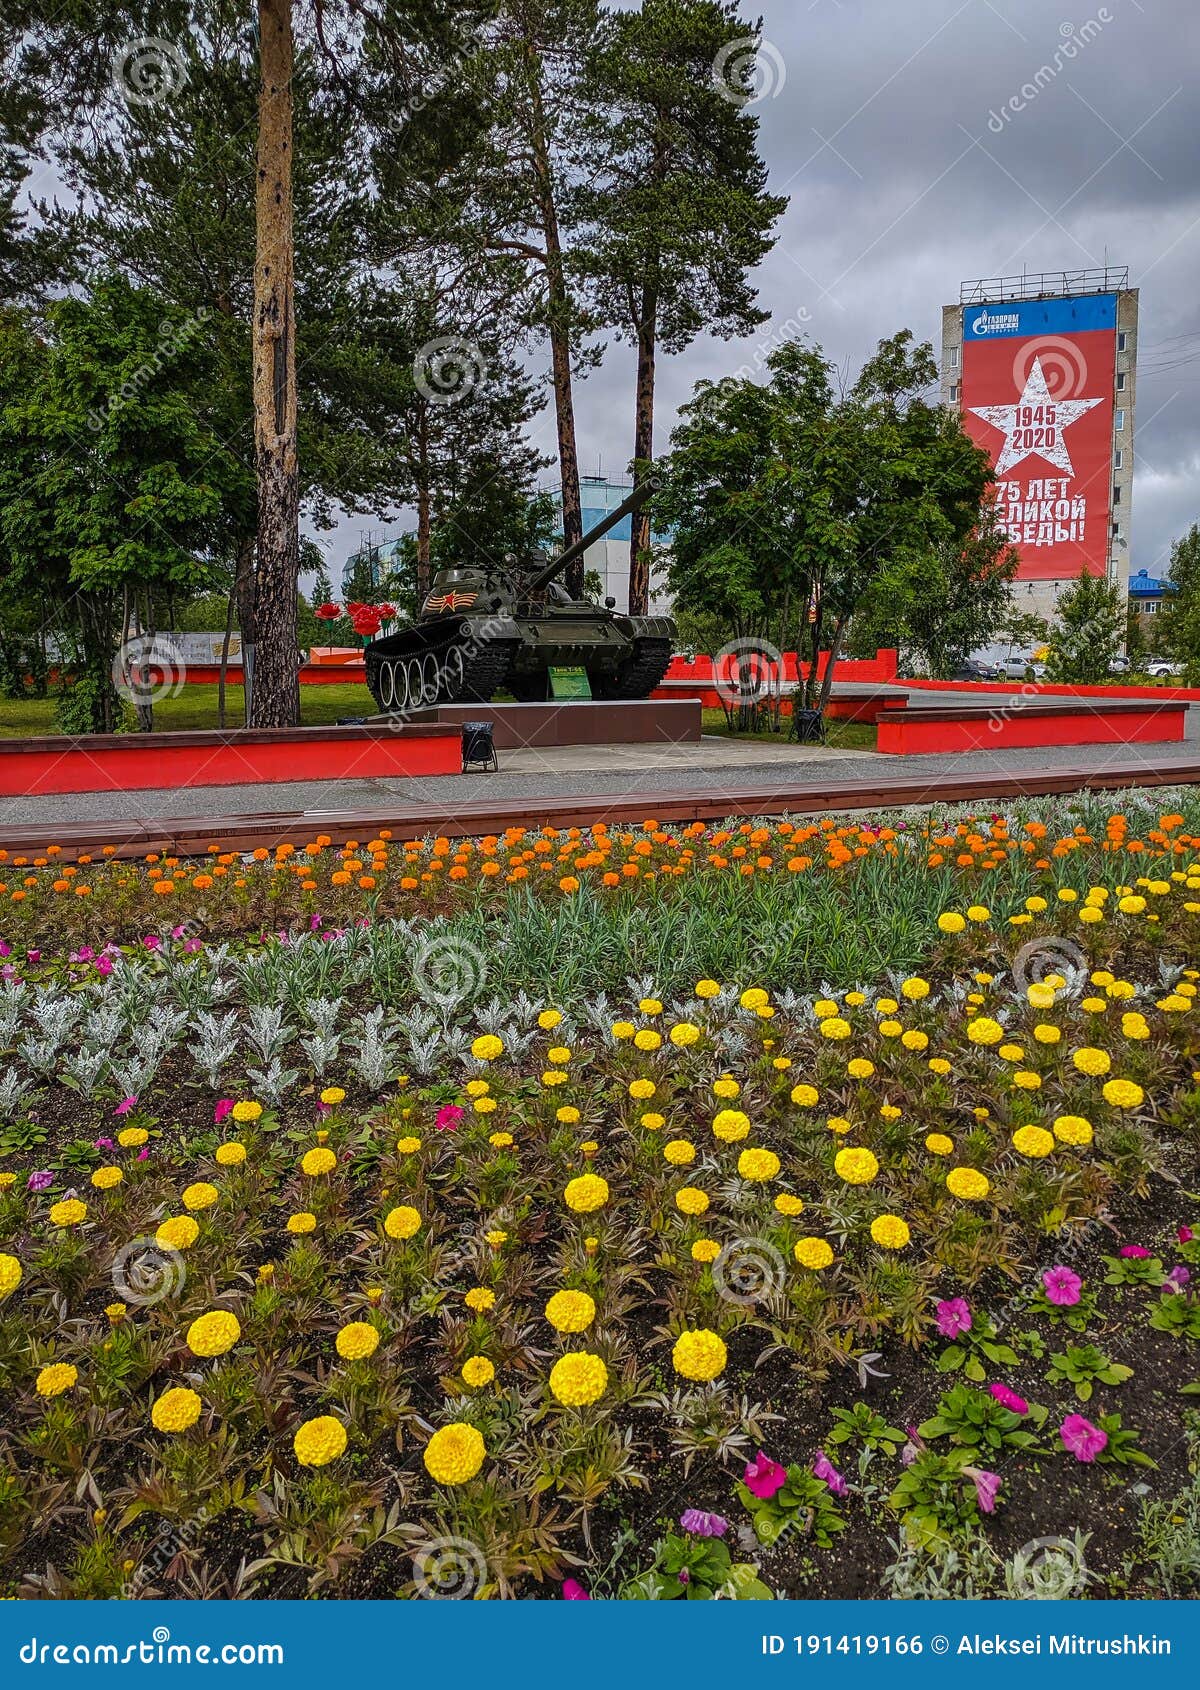 Noyabrsk, Russia - May 30, 2020: City Path With Flower Beds On The